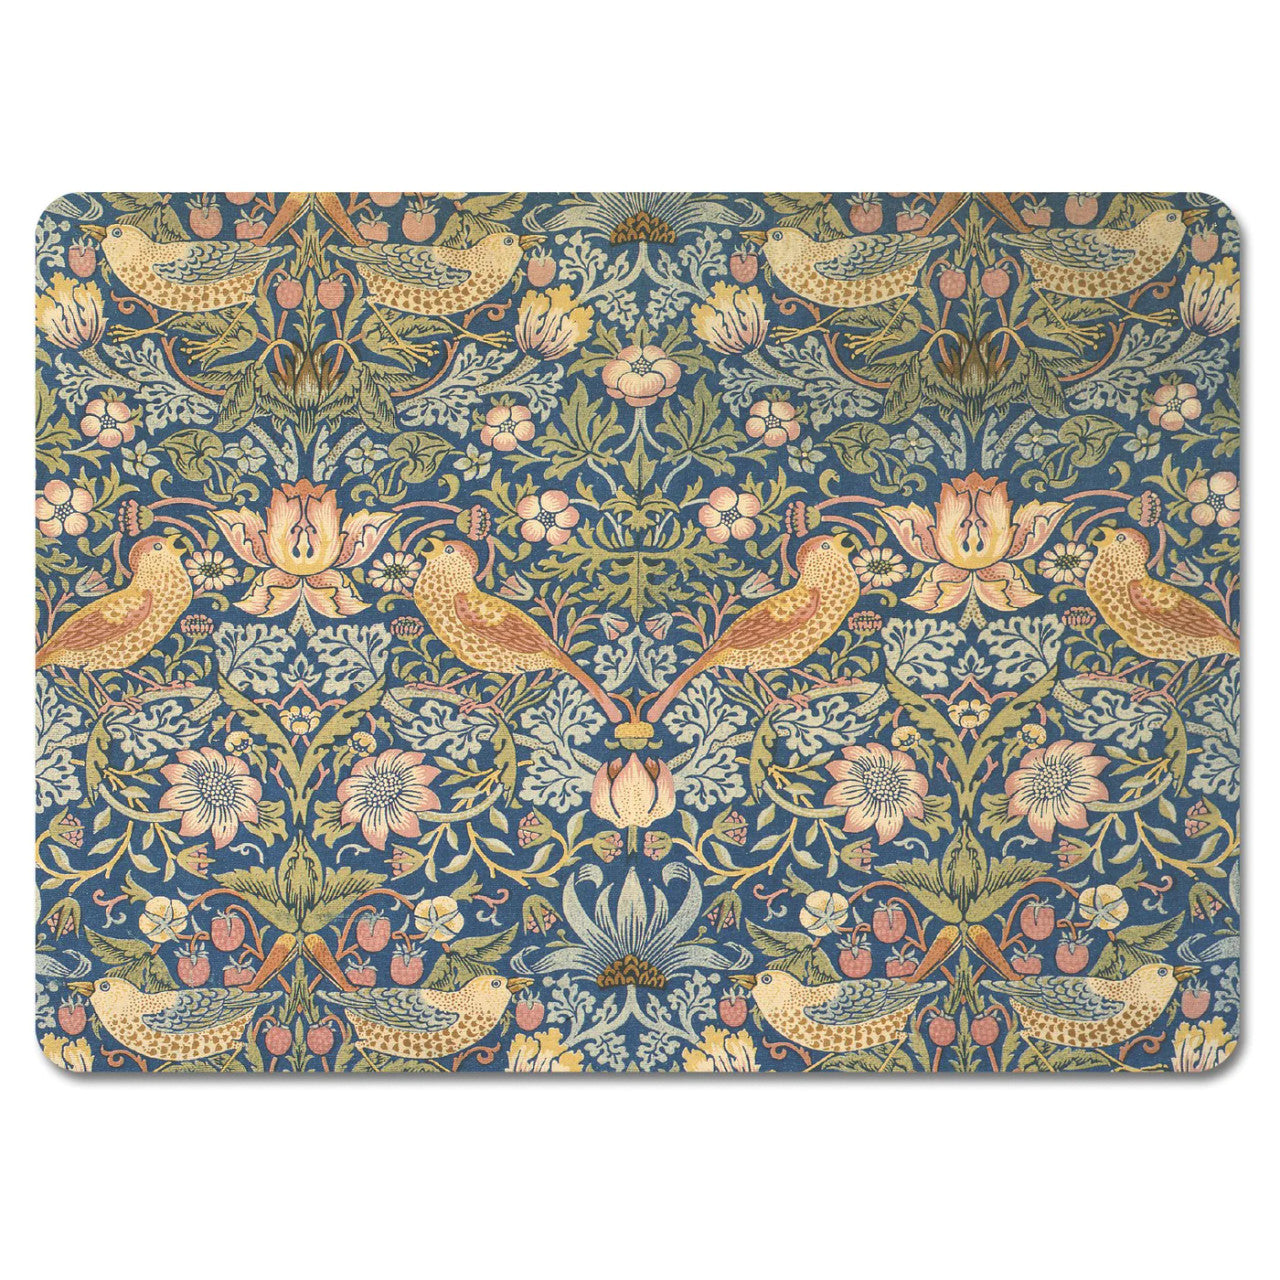 William Morris Strawberry Thief Placemat by Customworks.